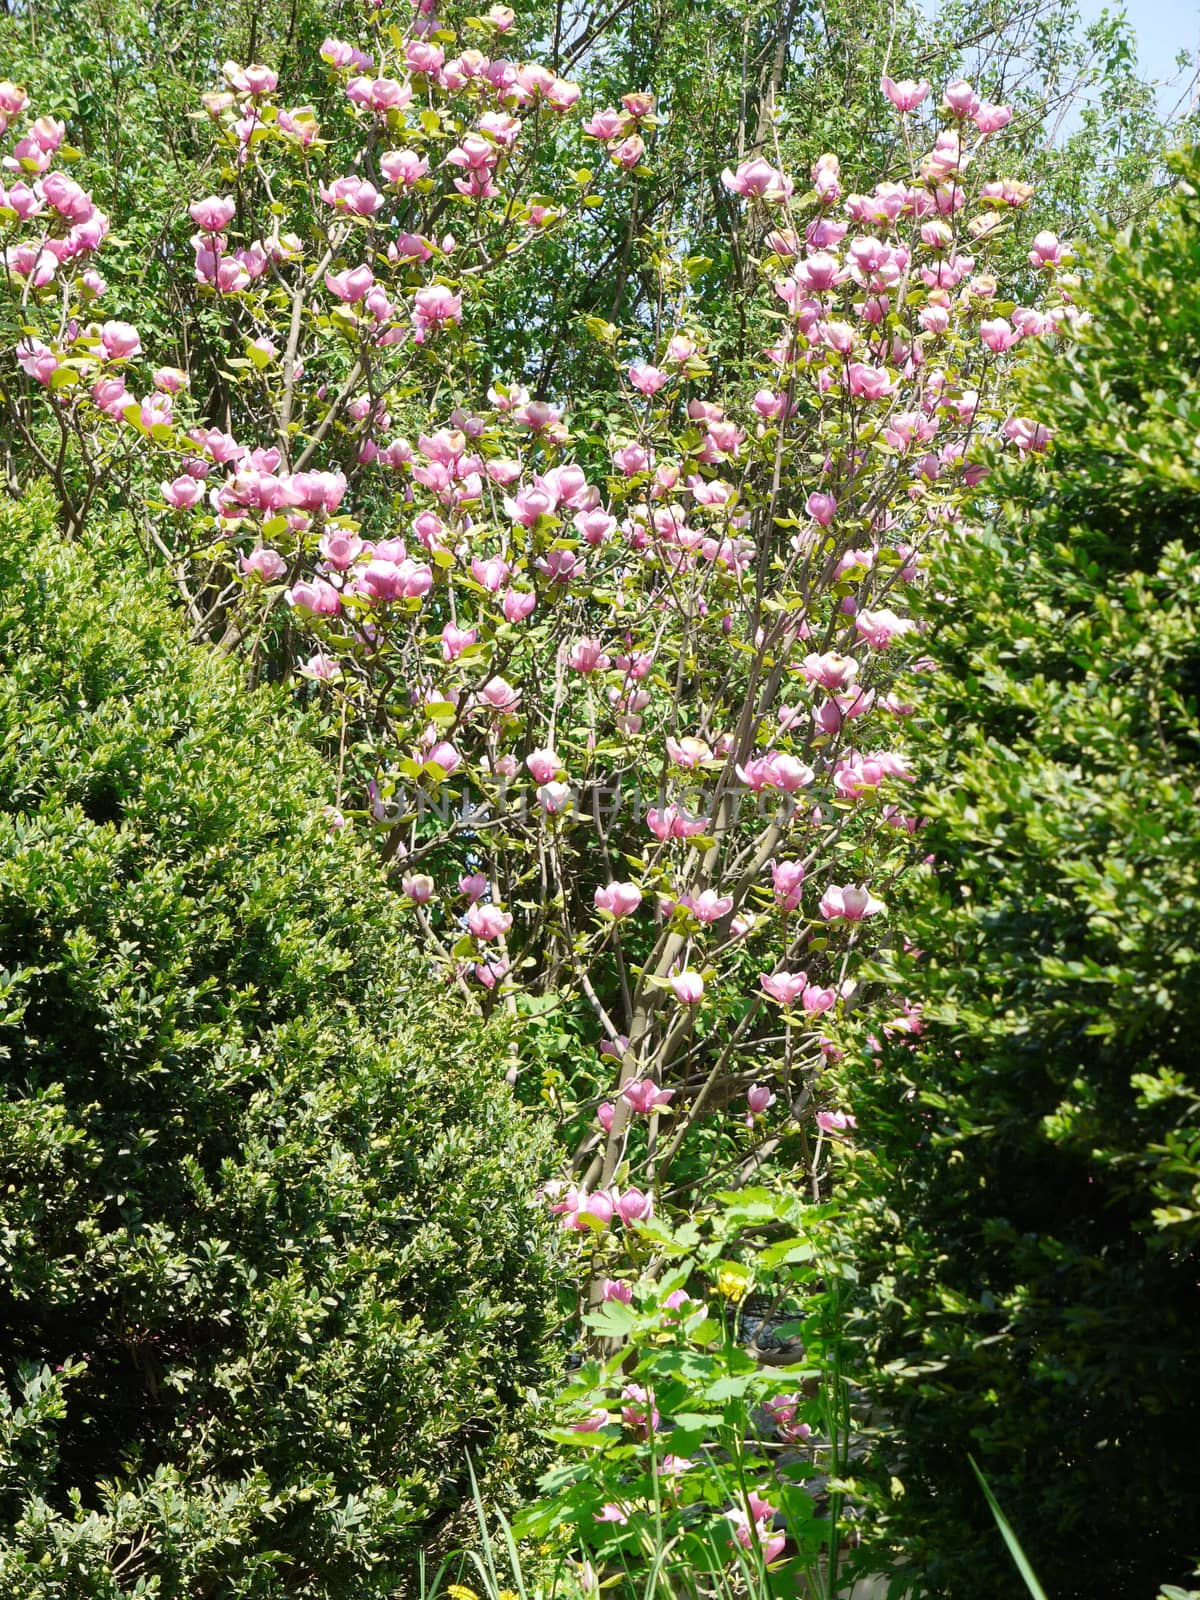 The magnificent flower of the pink magnolia is visible among the bushes of evergreen boxwood by Adamchuk